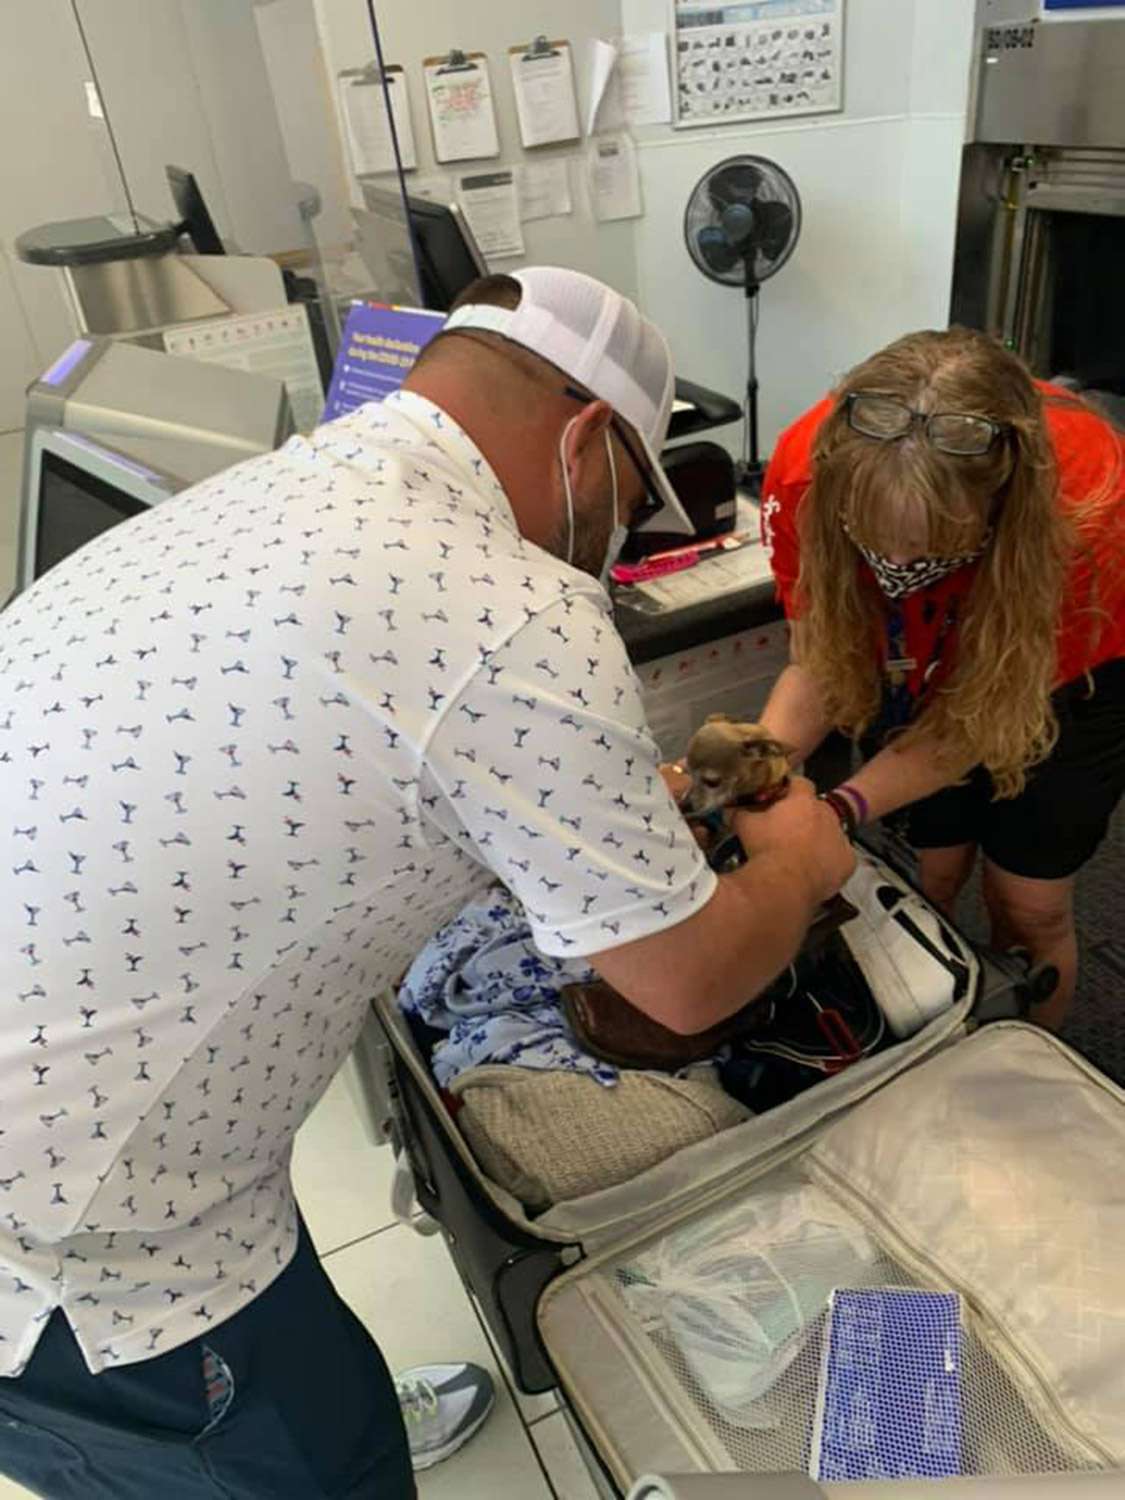 Texas Couple Discovers Their Pet Chihuahua Hiding Inside a Suitcase They Brought to the Airport